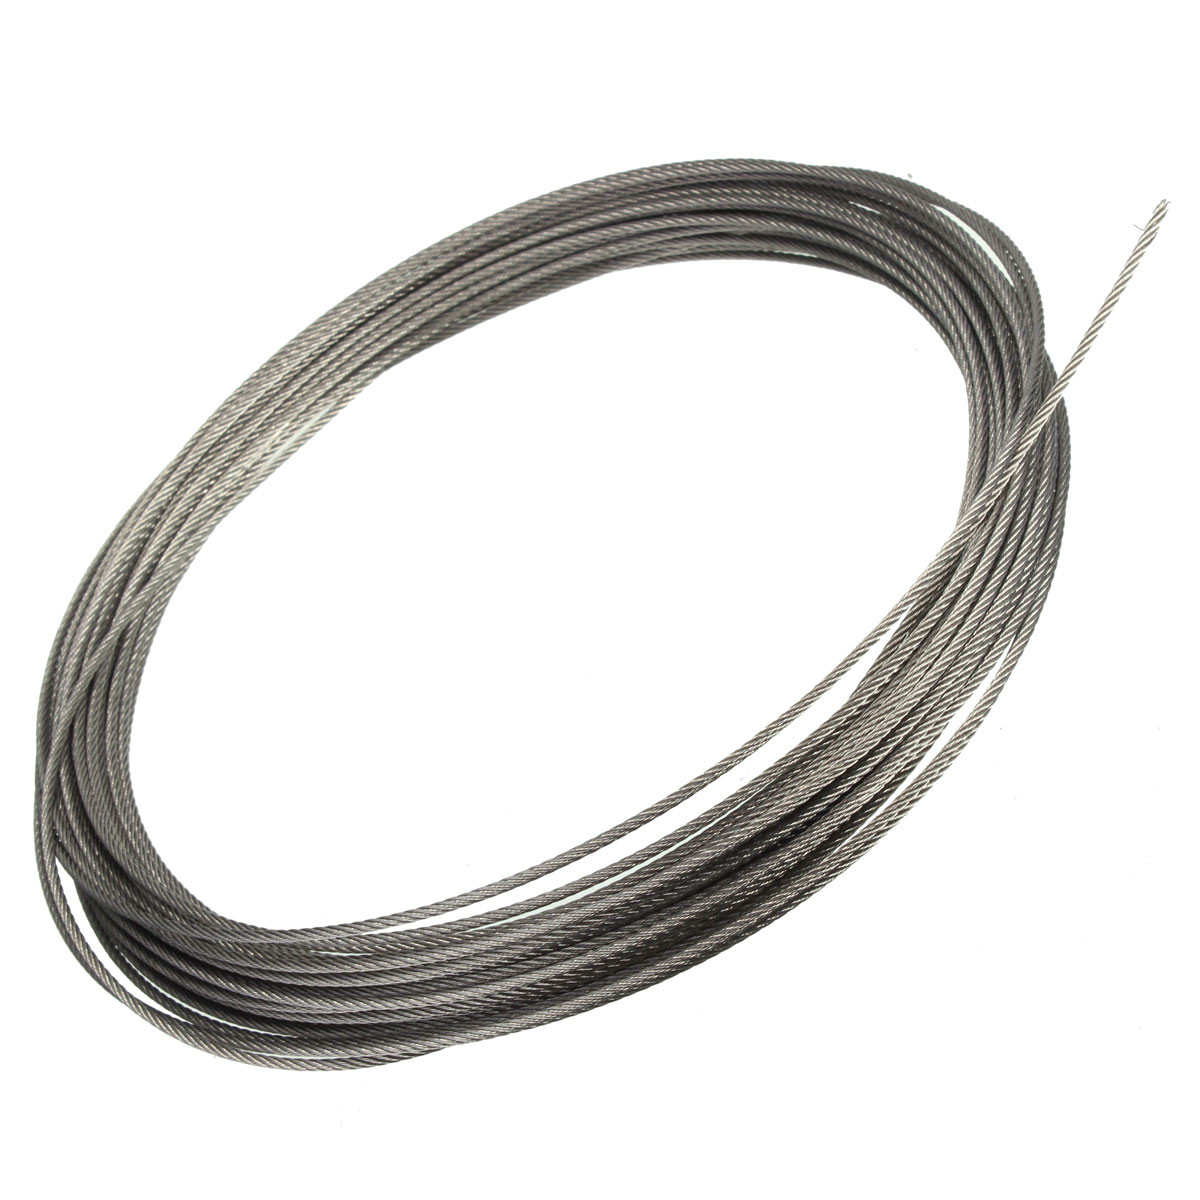 15M-316-Stainless-Steel-Clothes-Cable-Line-Wire-Rope-1035887-7